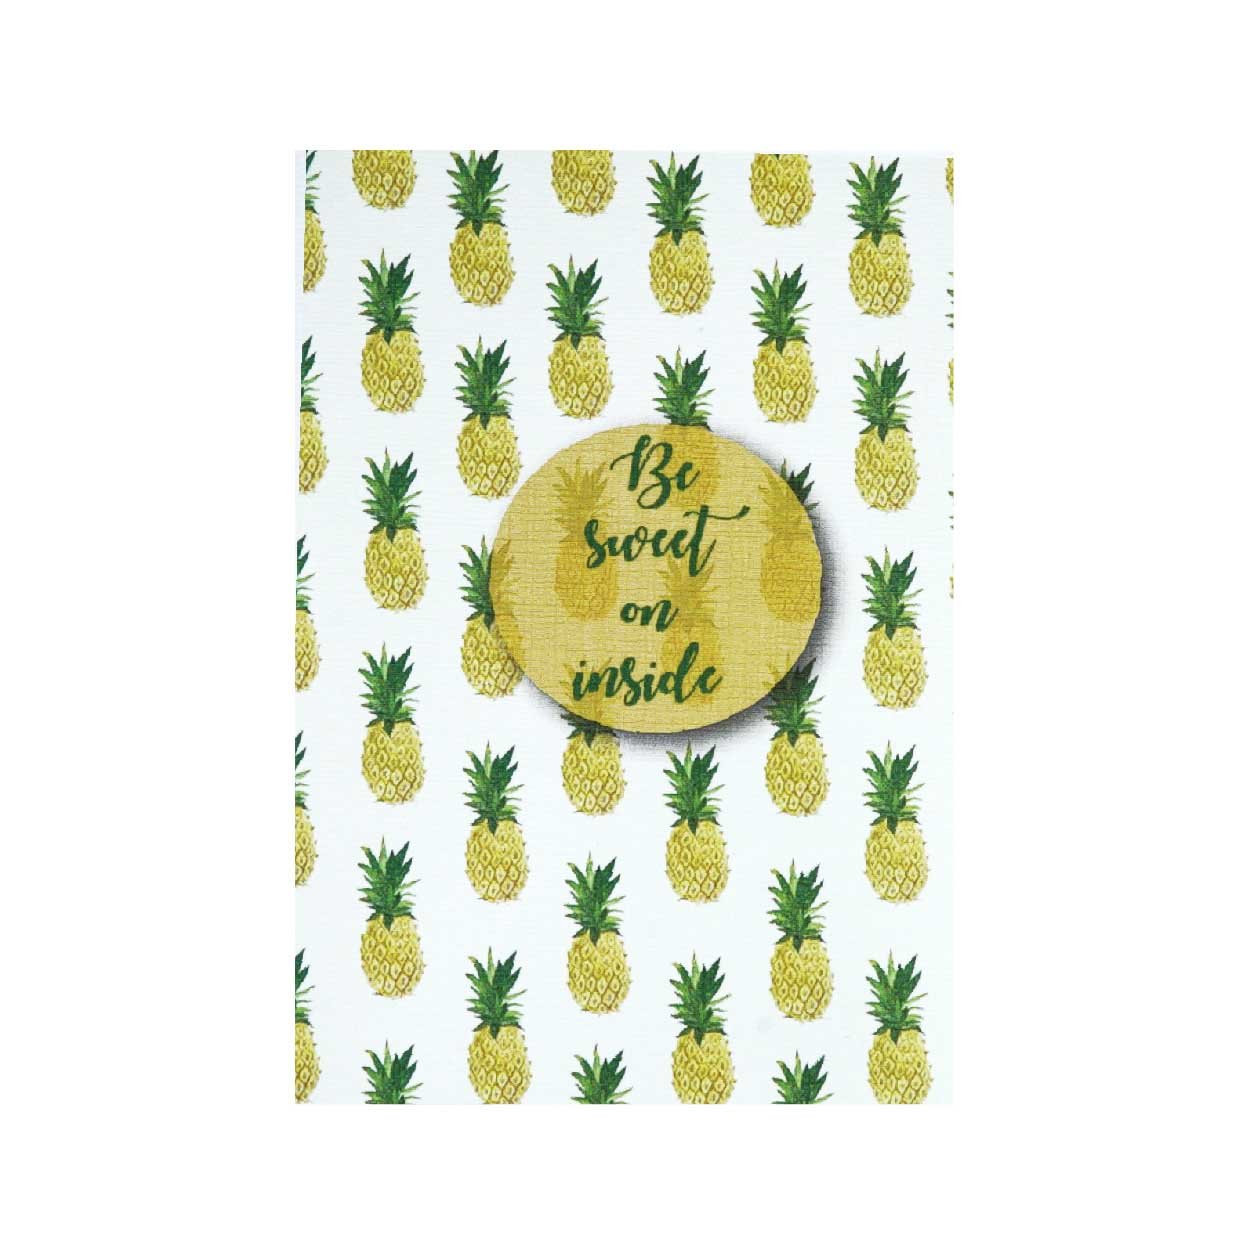 442933-be-sweet-on-inside-ananas-defter